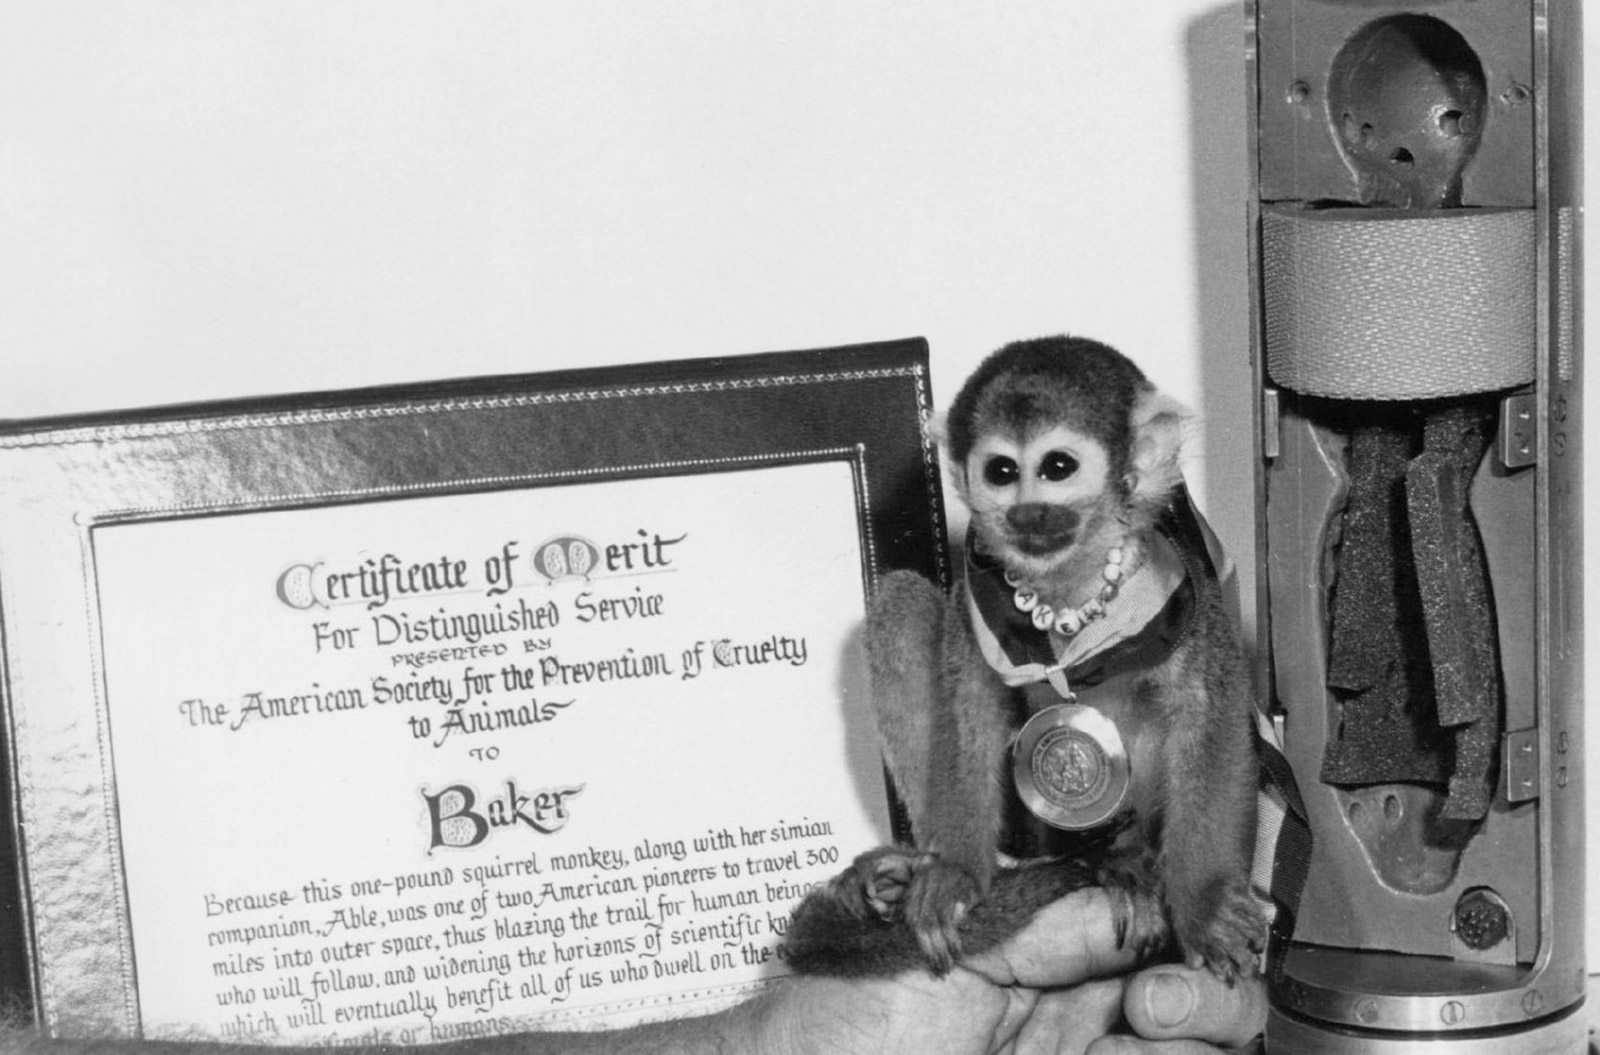 A photograph of the squirrel monkey Miss Baker after she had flown three hundred and sixty miles into space in May 1959. In the photo she appears with a congratulatory certificate from the American Society for the Prevention of Cruelty to Animals.